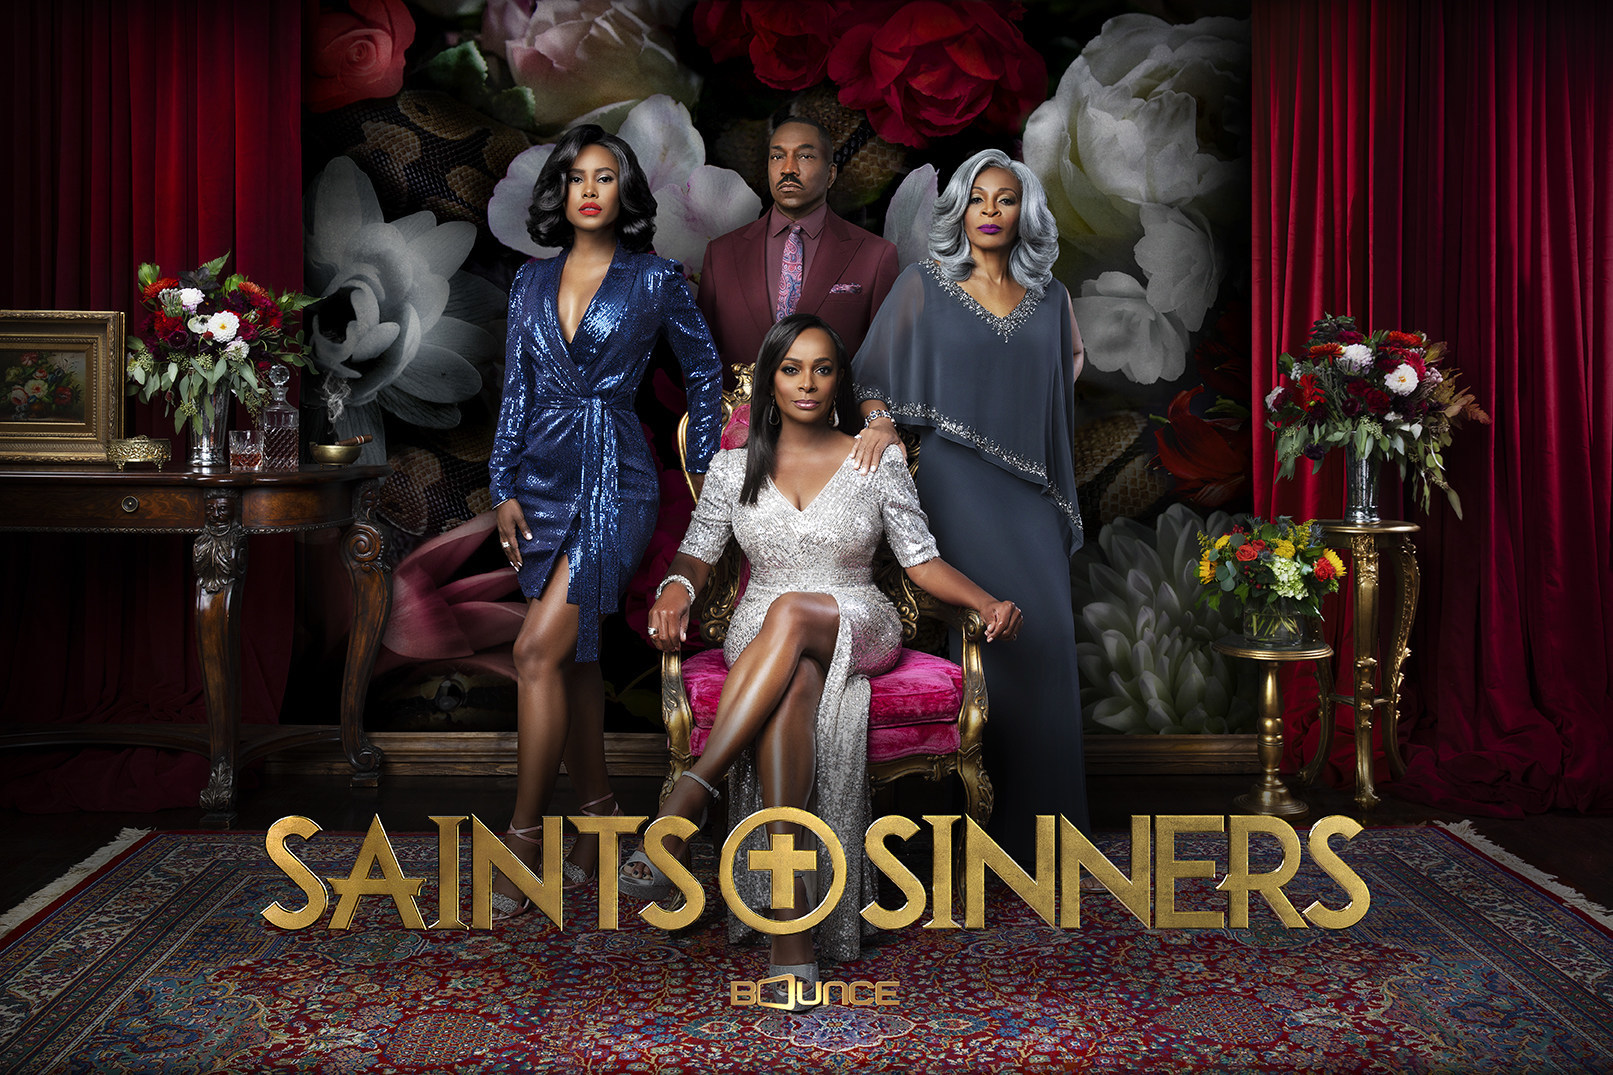 New Faces Join Cast in Season Five Premiere of "Saints & Sinners" This